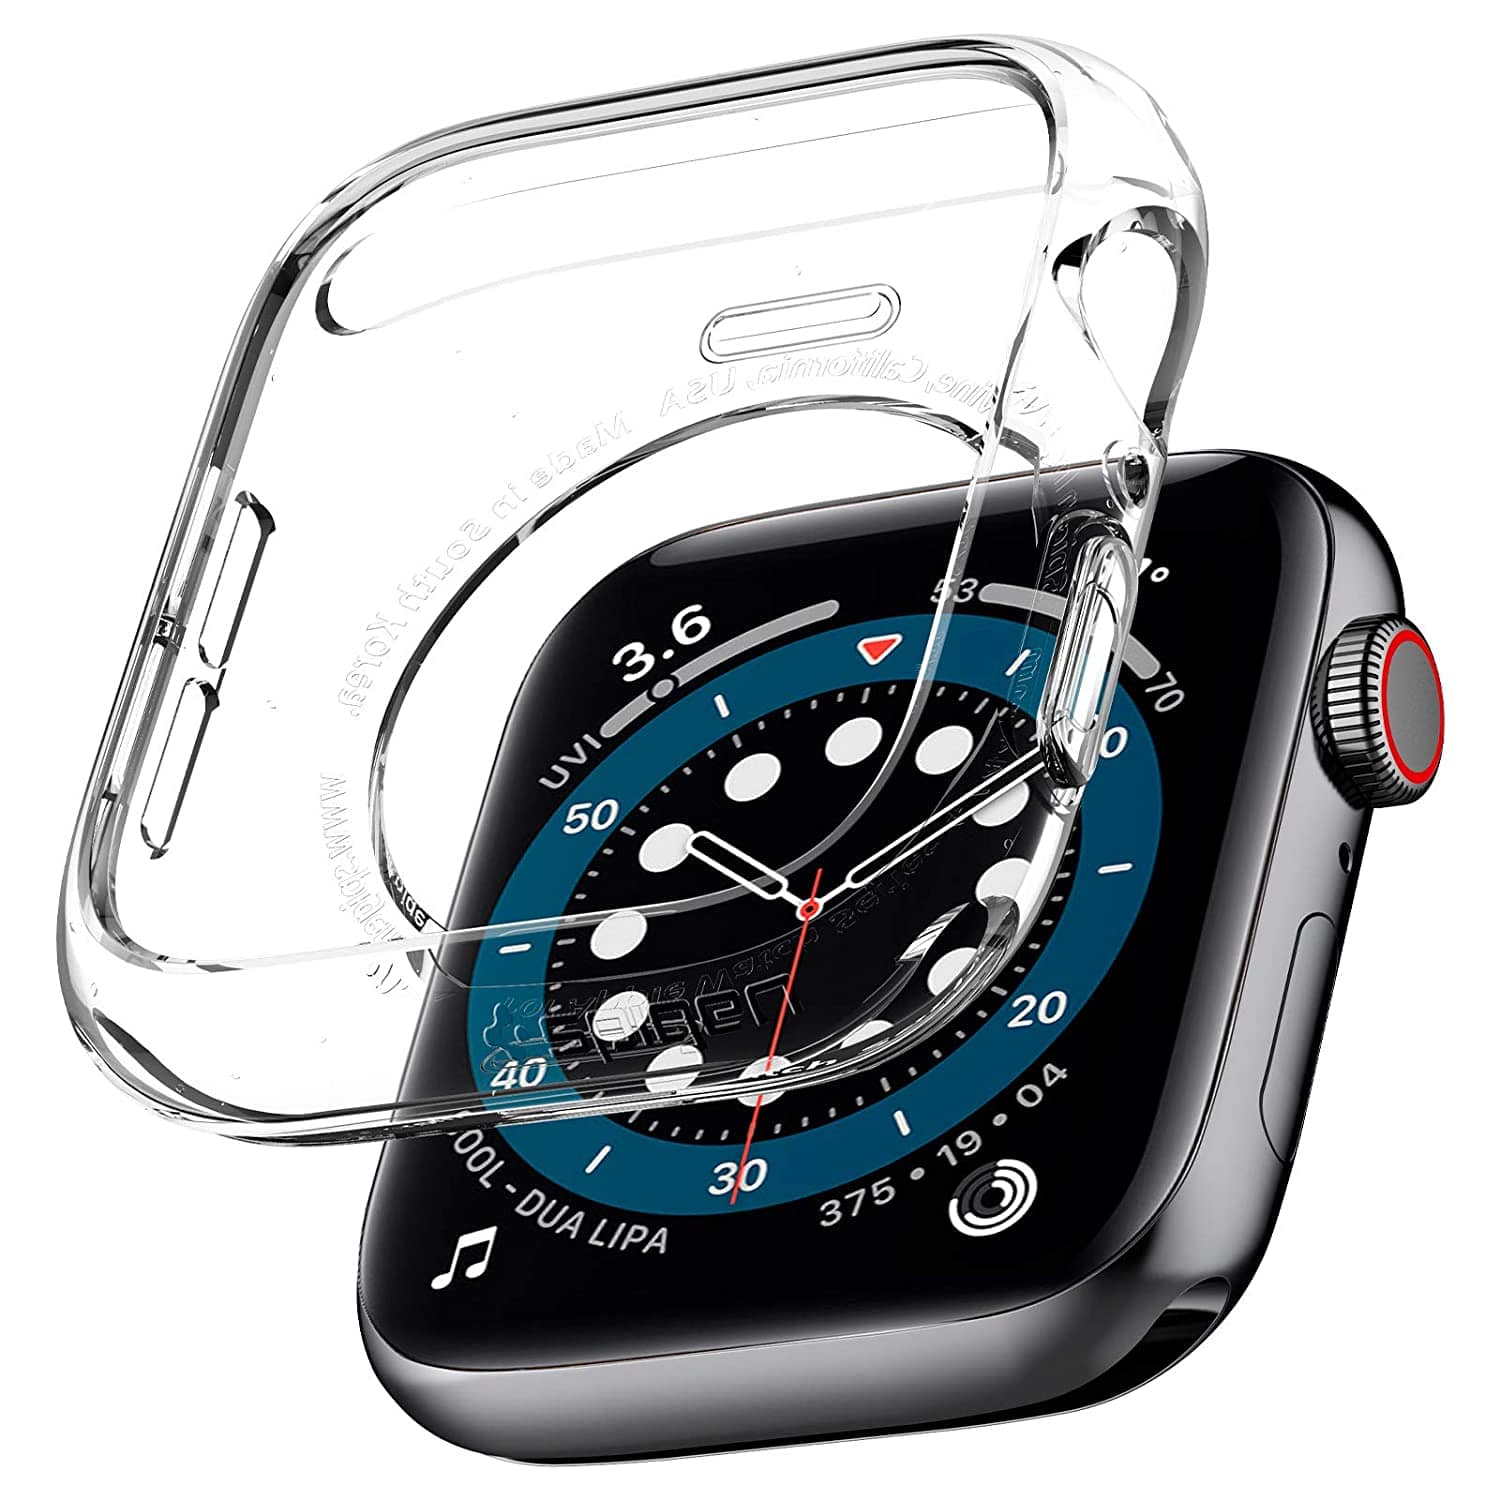 Transparent 360 Degree Body Bumpper Case for Apple Watch - A to Z Prime